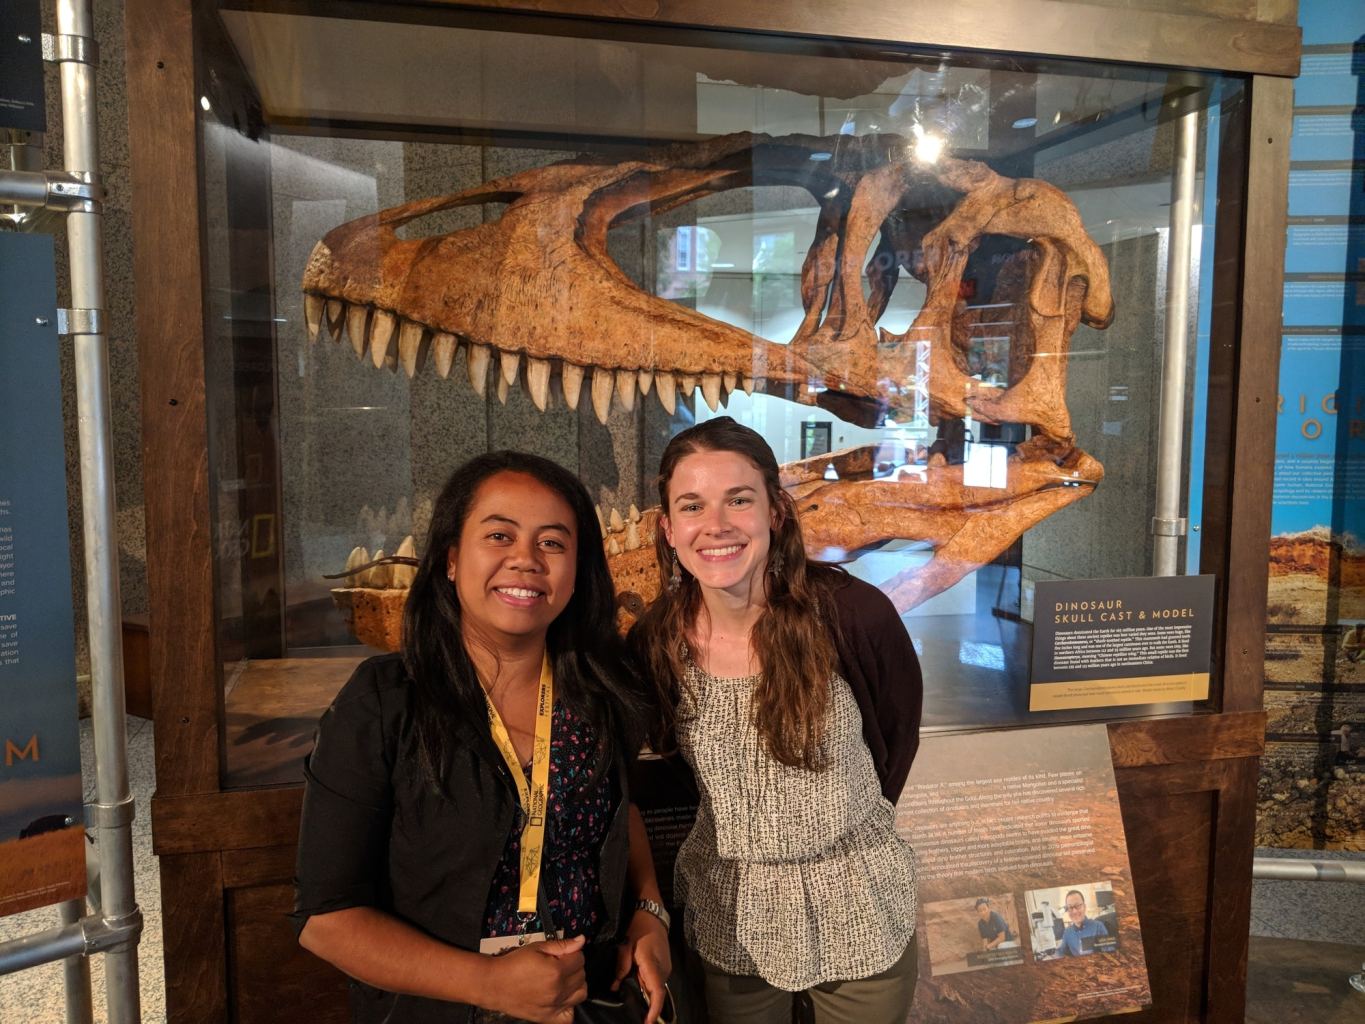 Tsiory and Susan pose together in front of a dinosaur fossil on display.